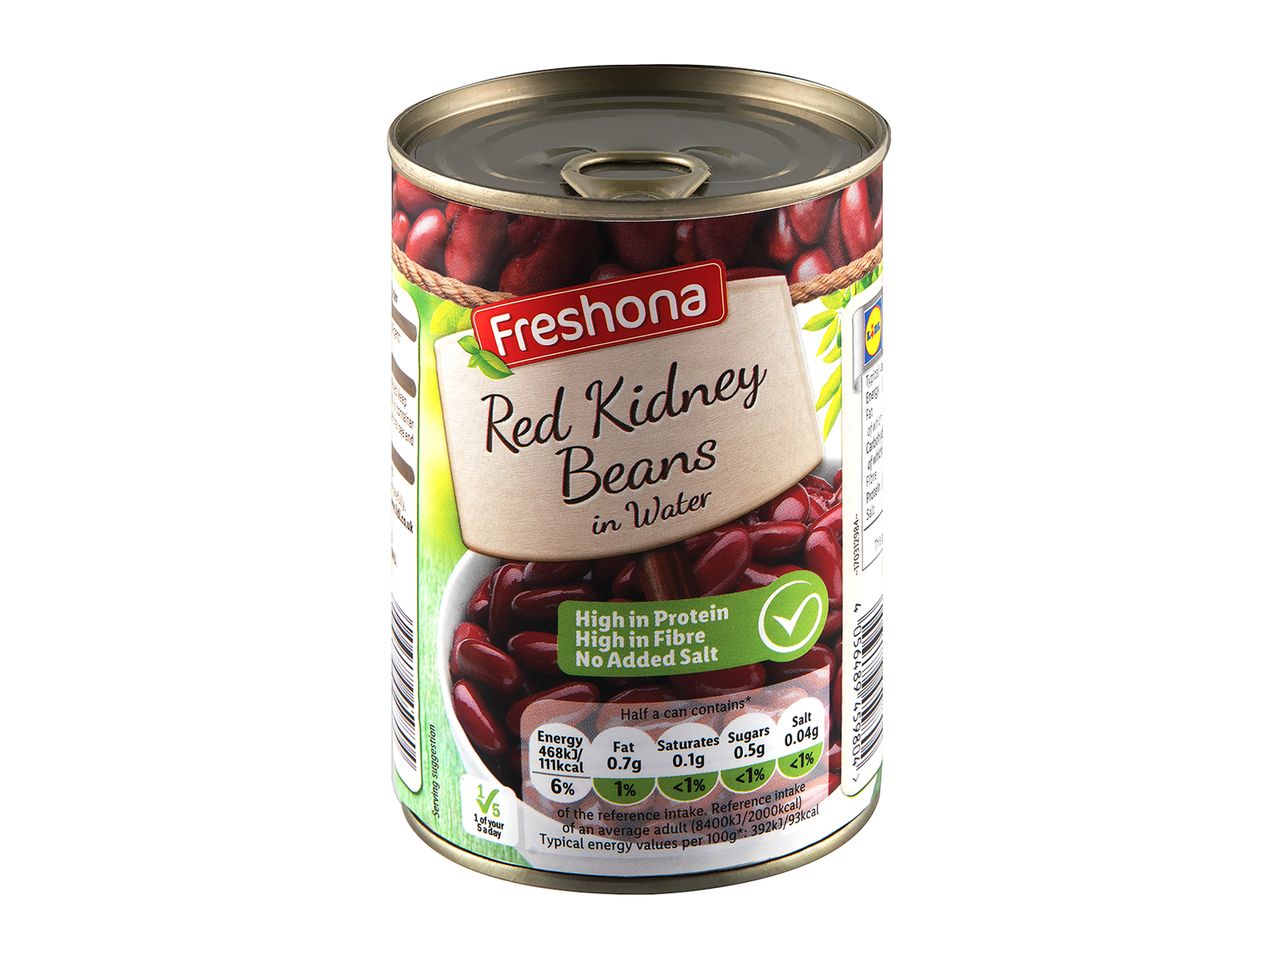 Go to full screen view: Freshona Red Kidney Beans in Water - Image 2